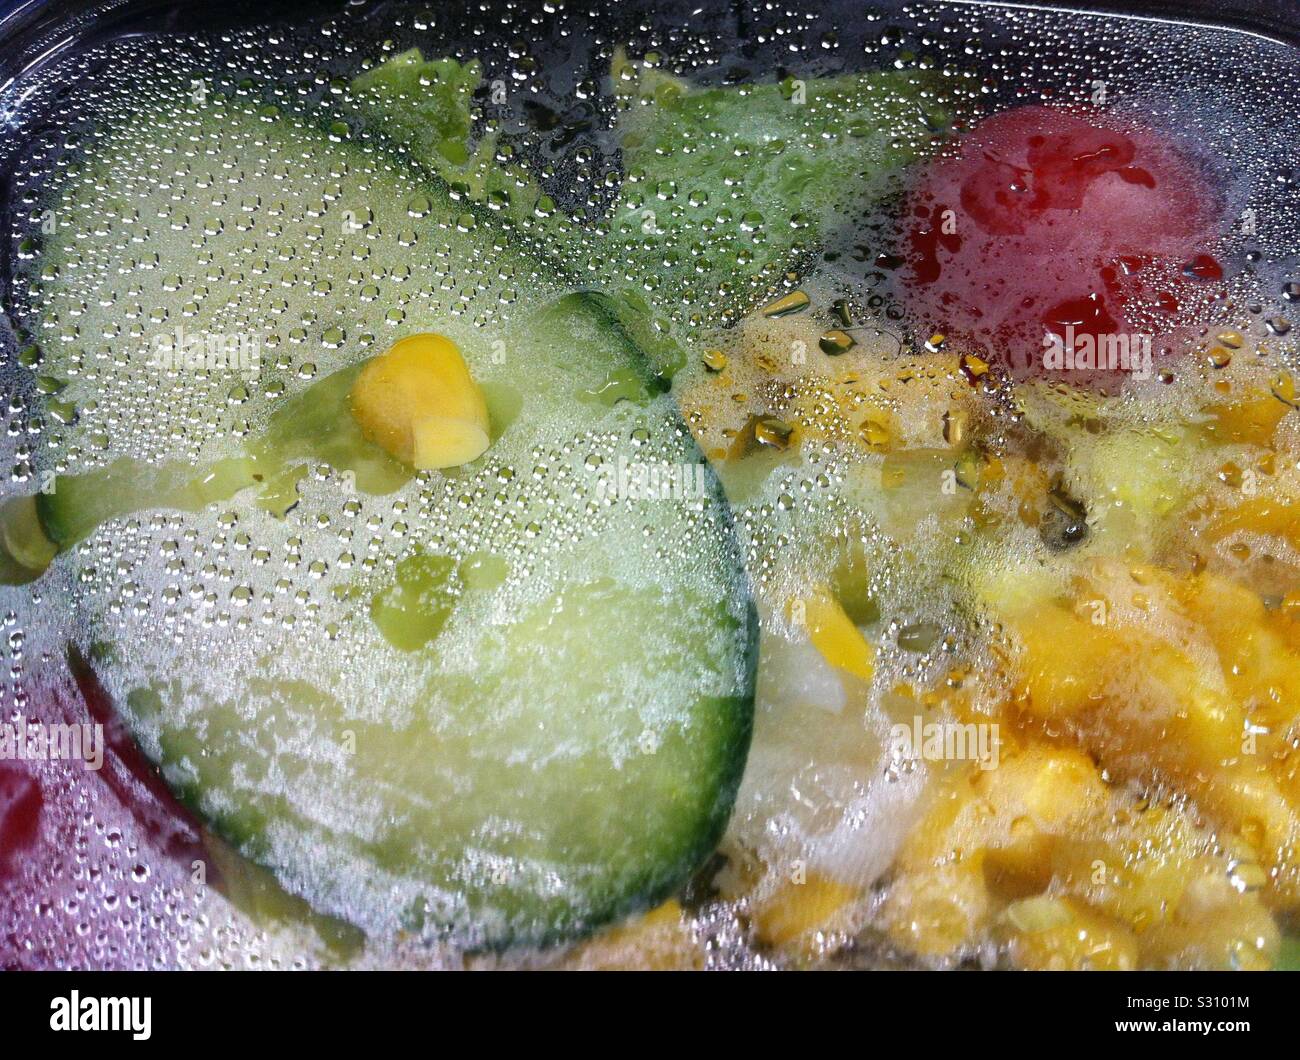 Close up shot of Fresh cut vegetables salad ingredients sealed in a refrigerated transparent plastic container. Stock Photo